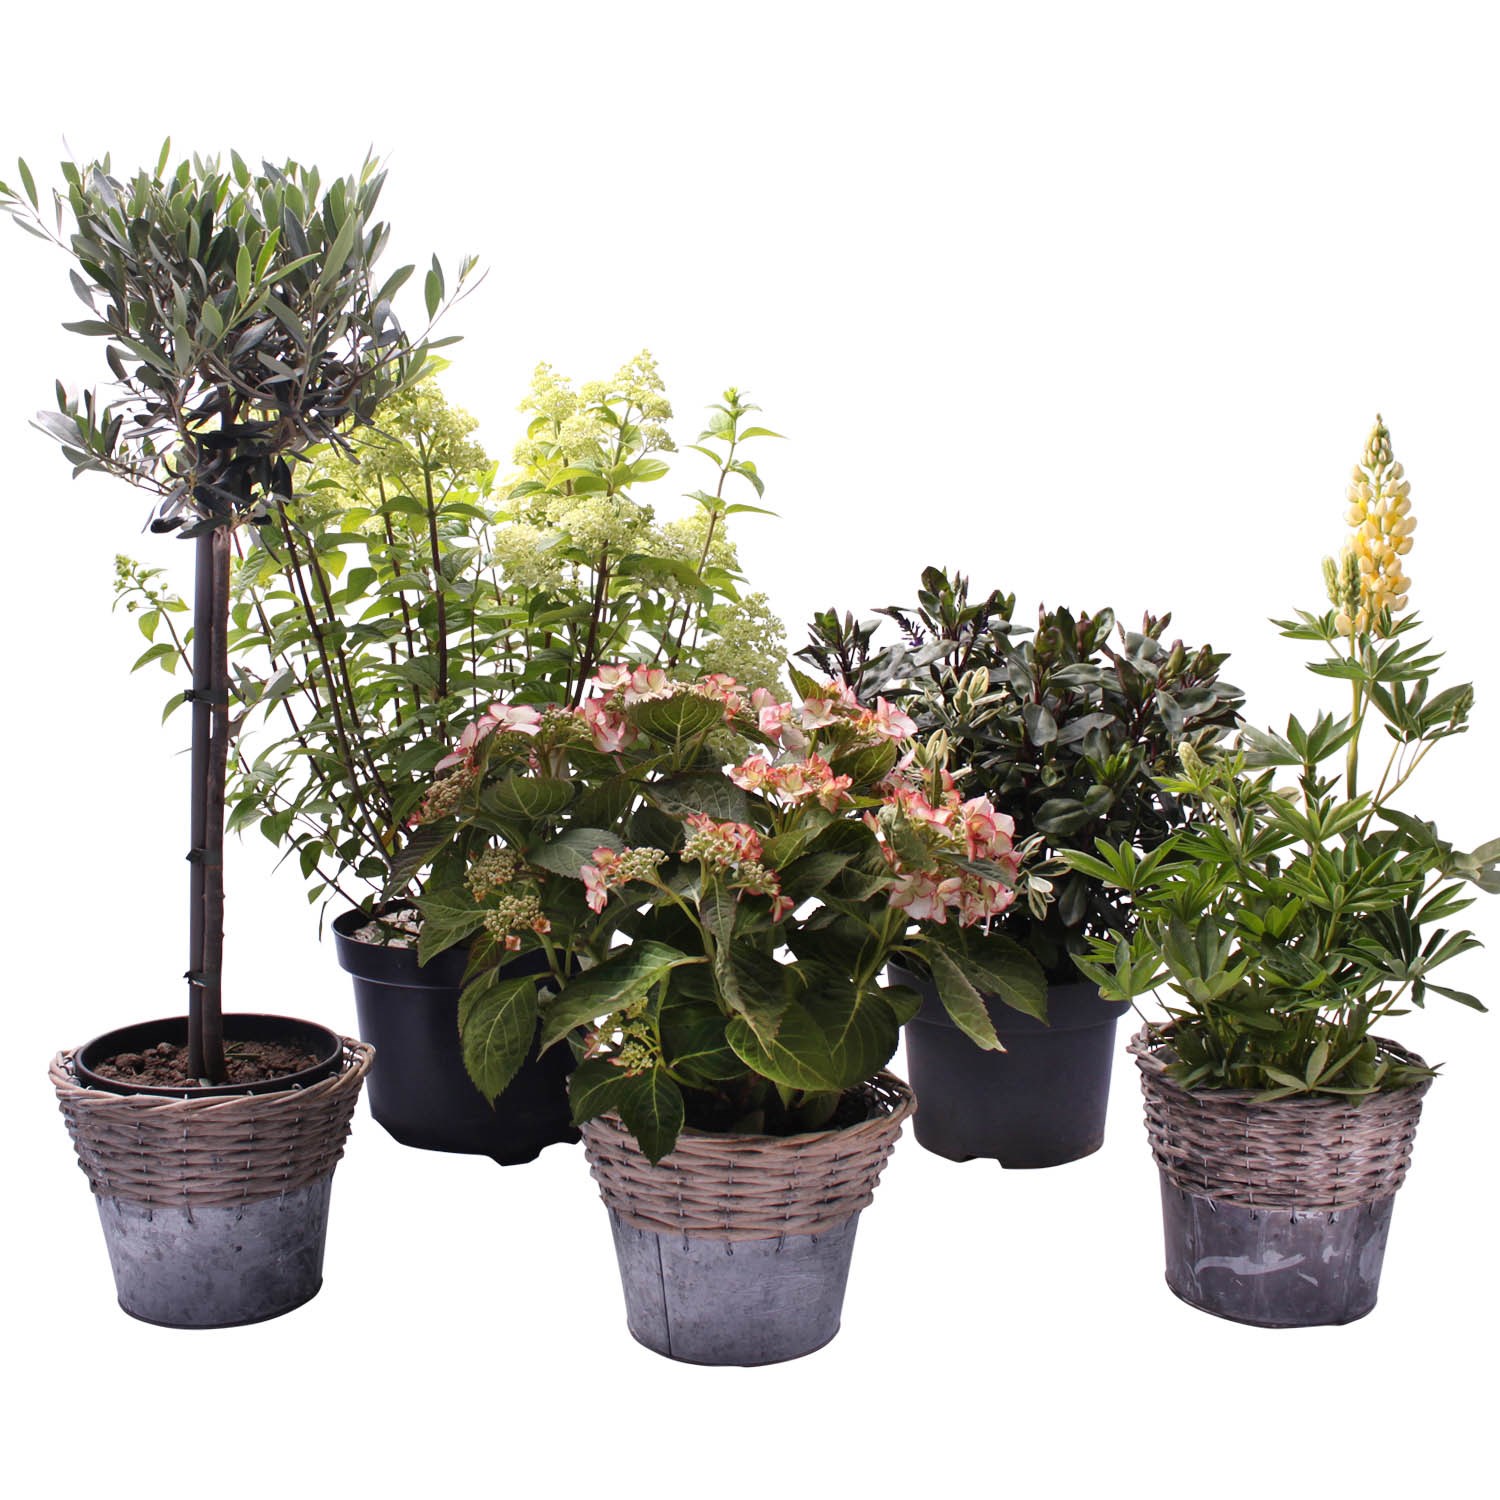 product image for Outside plant